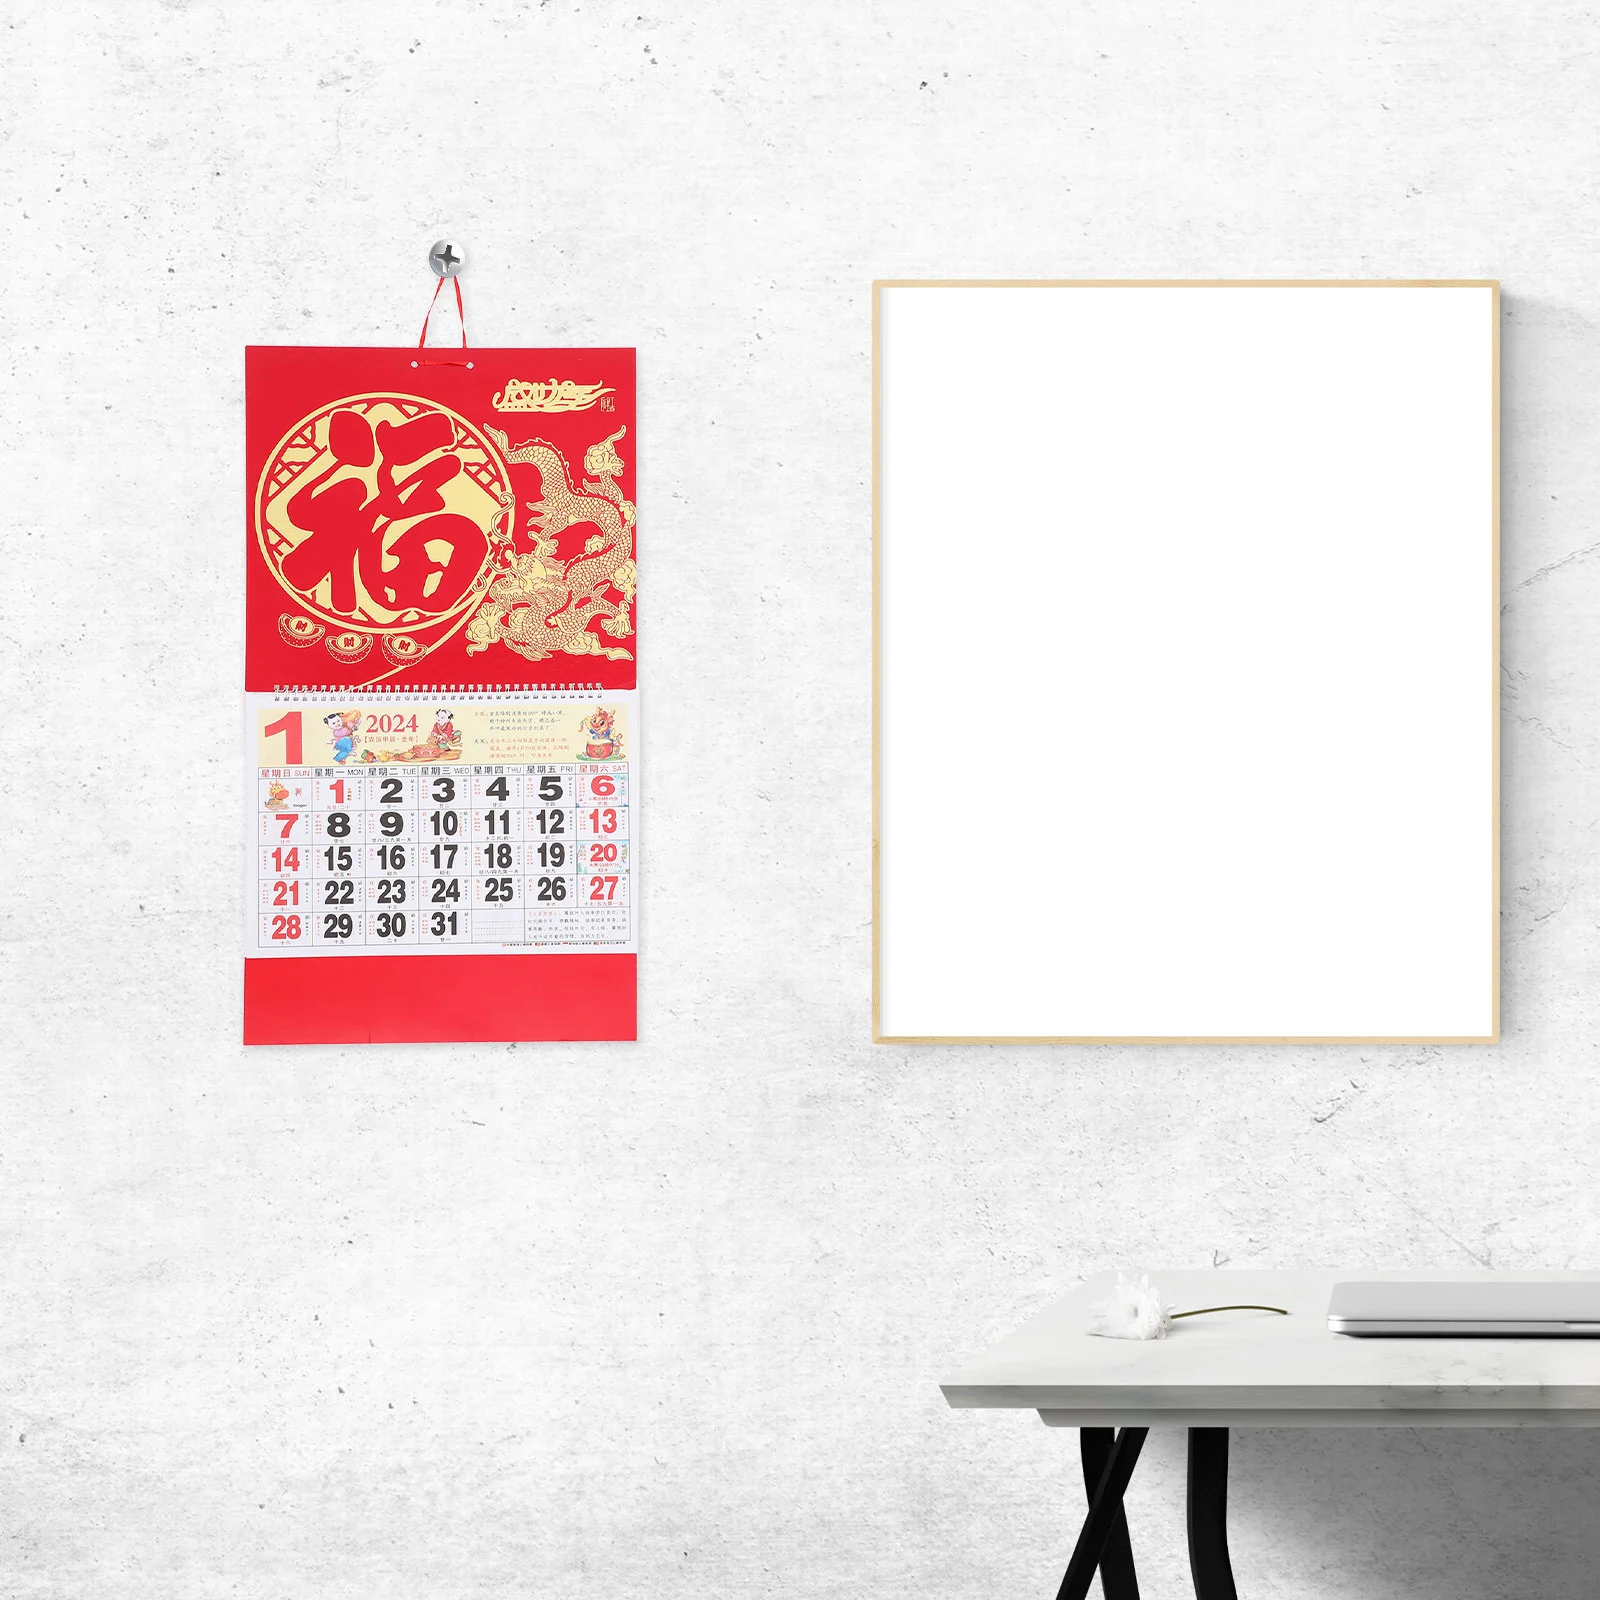 2 Pcs 2024 Wall Calendar Bathroom Decorations Chinese New Year The Dragon Lunar Paper Decorative Hanging Household